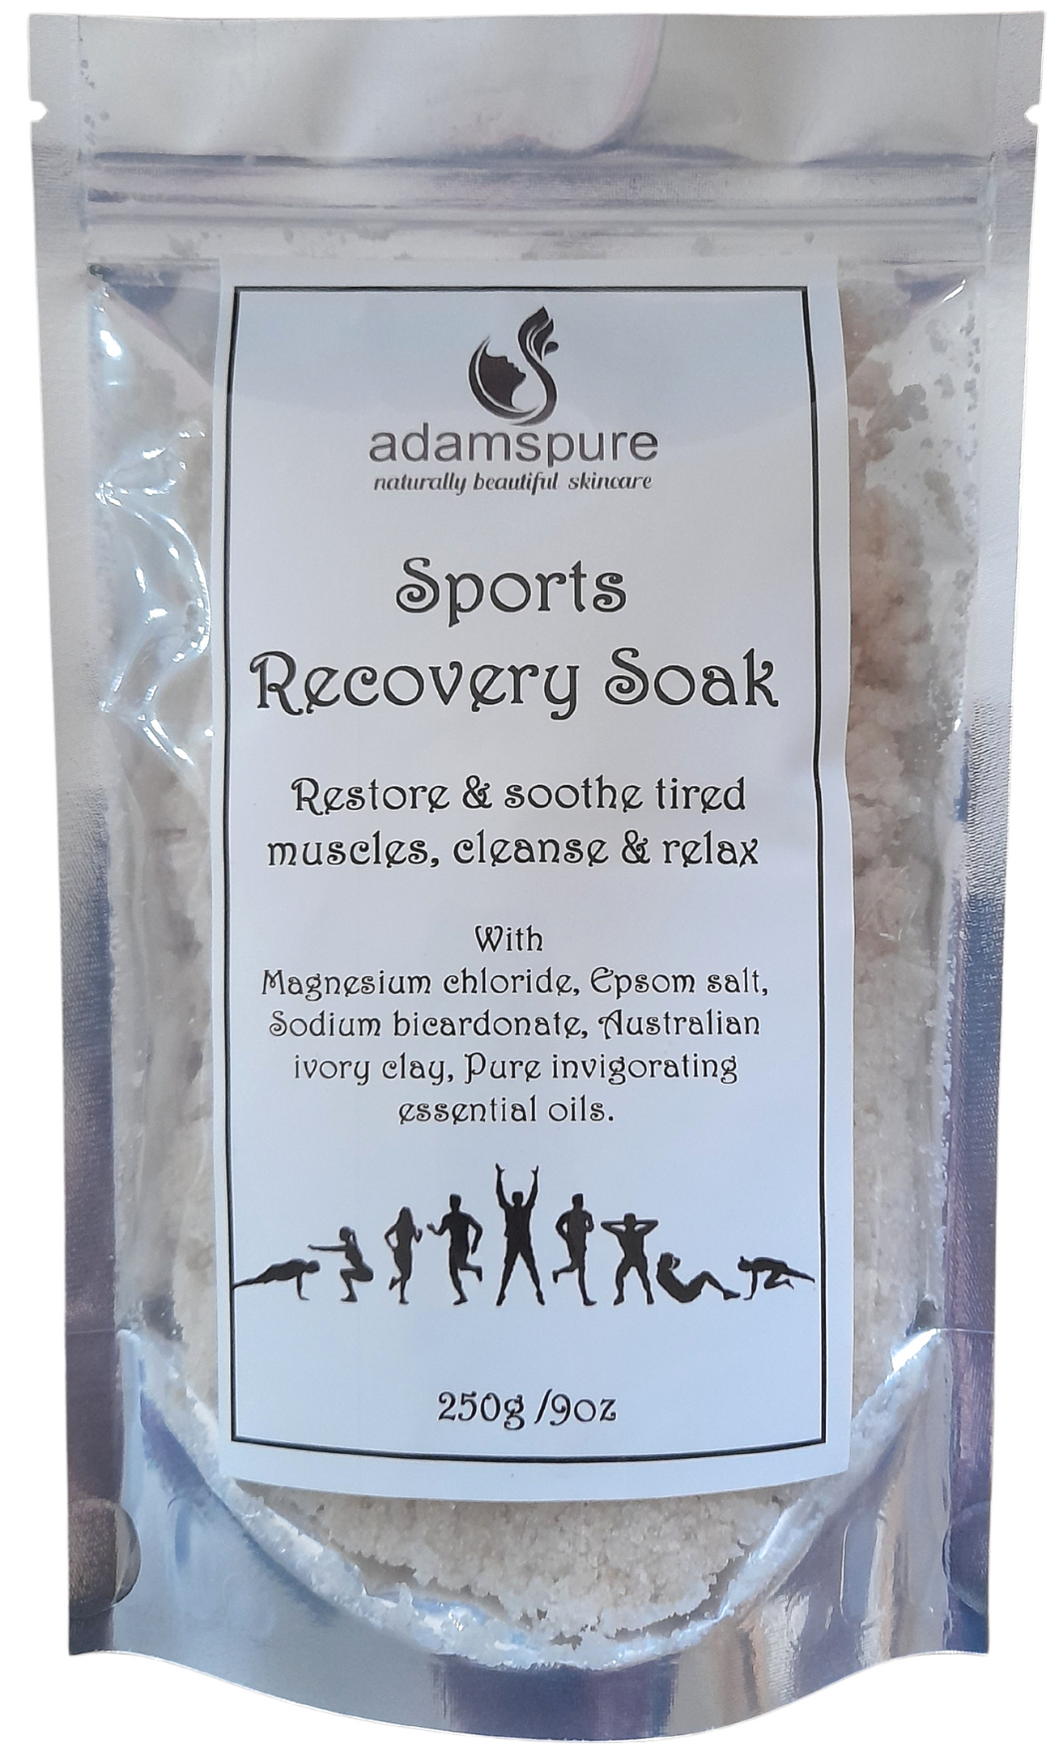 Sports recovery bath soak. Help sooth tired muscles. 100% natural and Australian made.